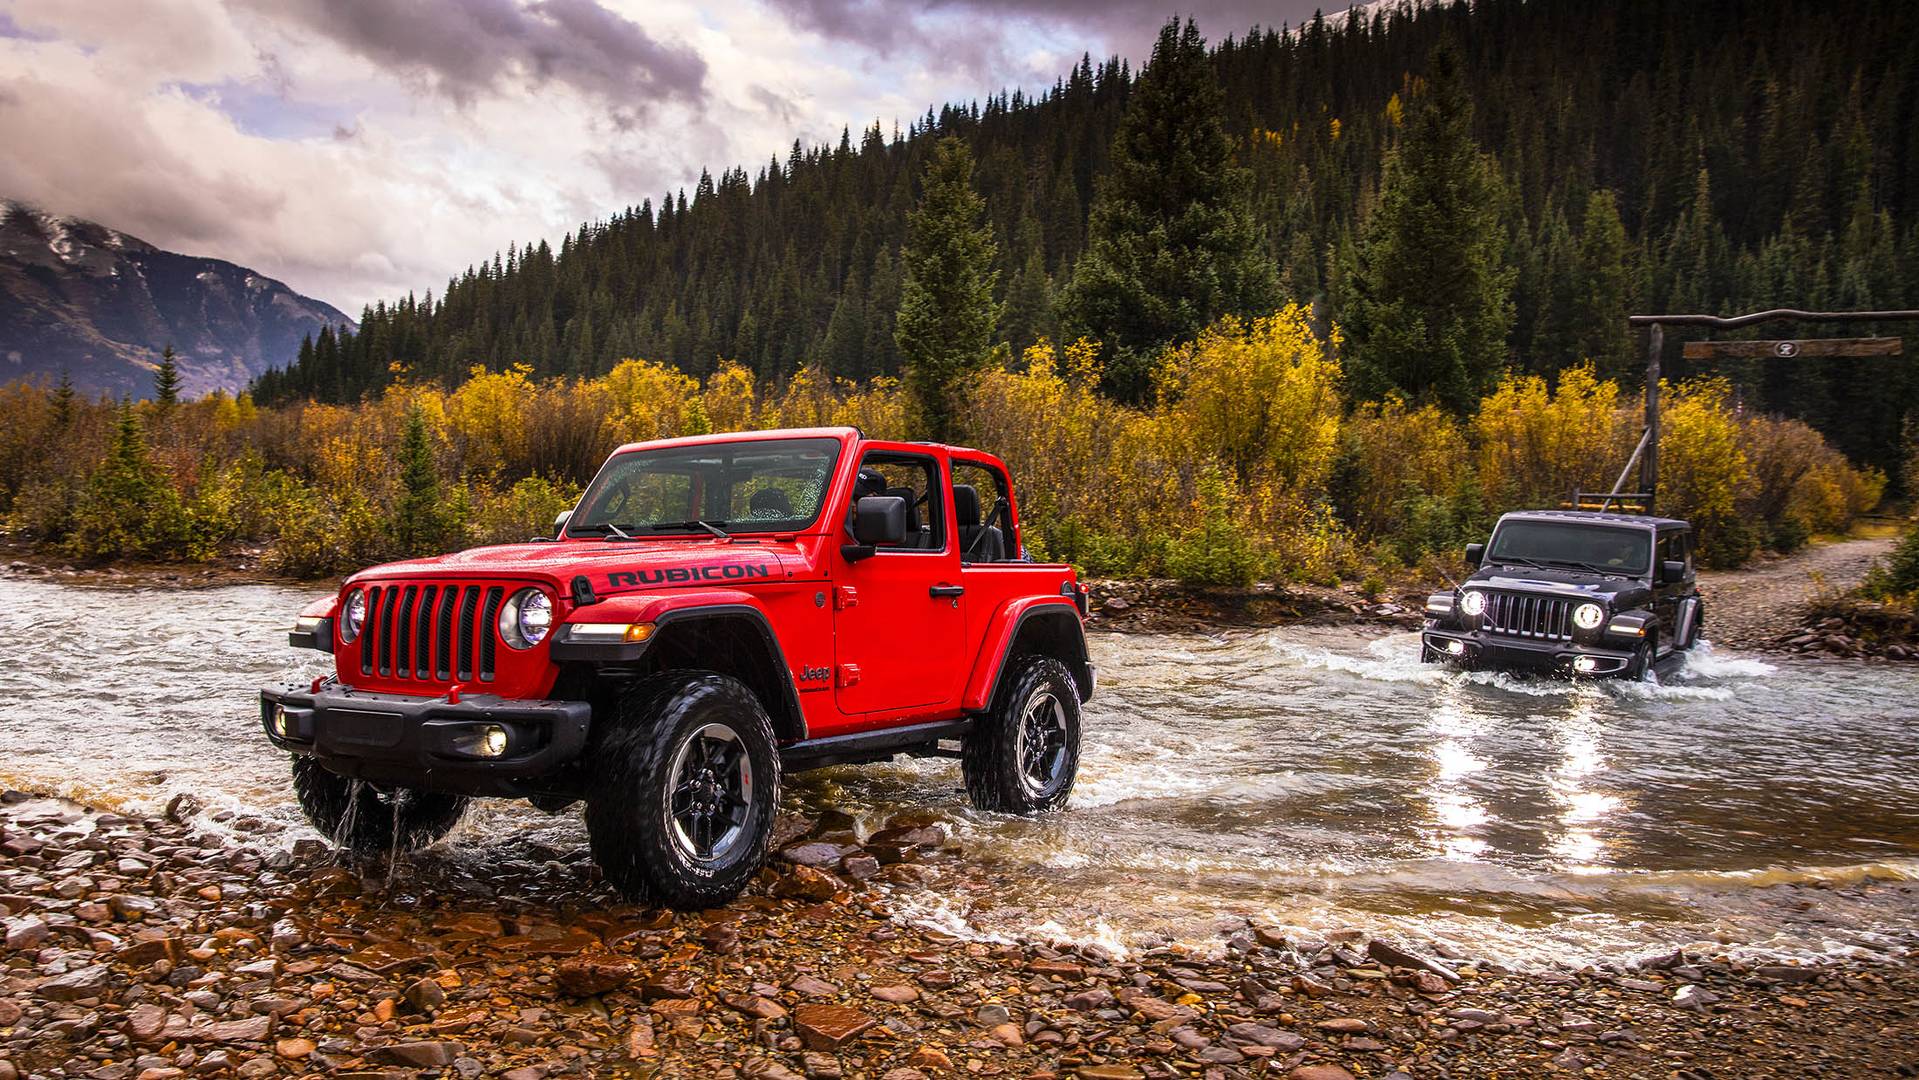 Jeep Discounts the JL Wrangler Up To $9,485 - autoevolution